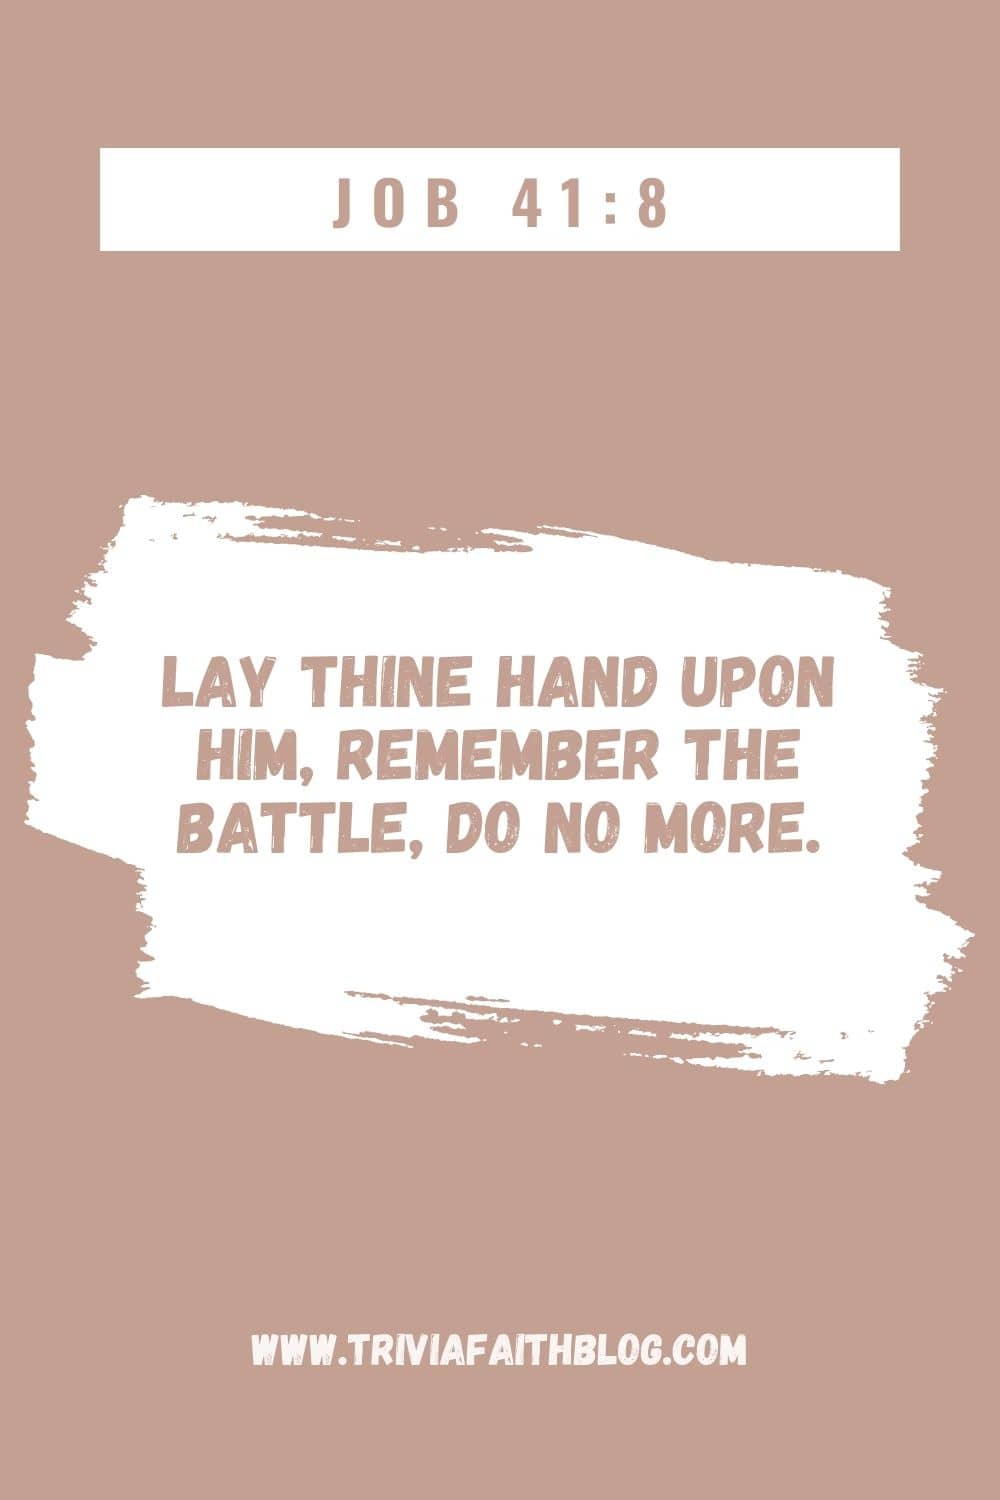 Lay thine hand upon him, remember the battle, do no more